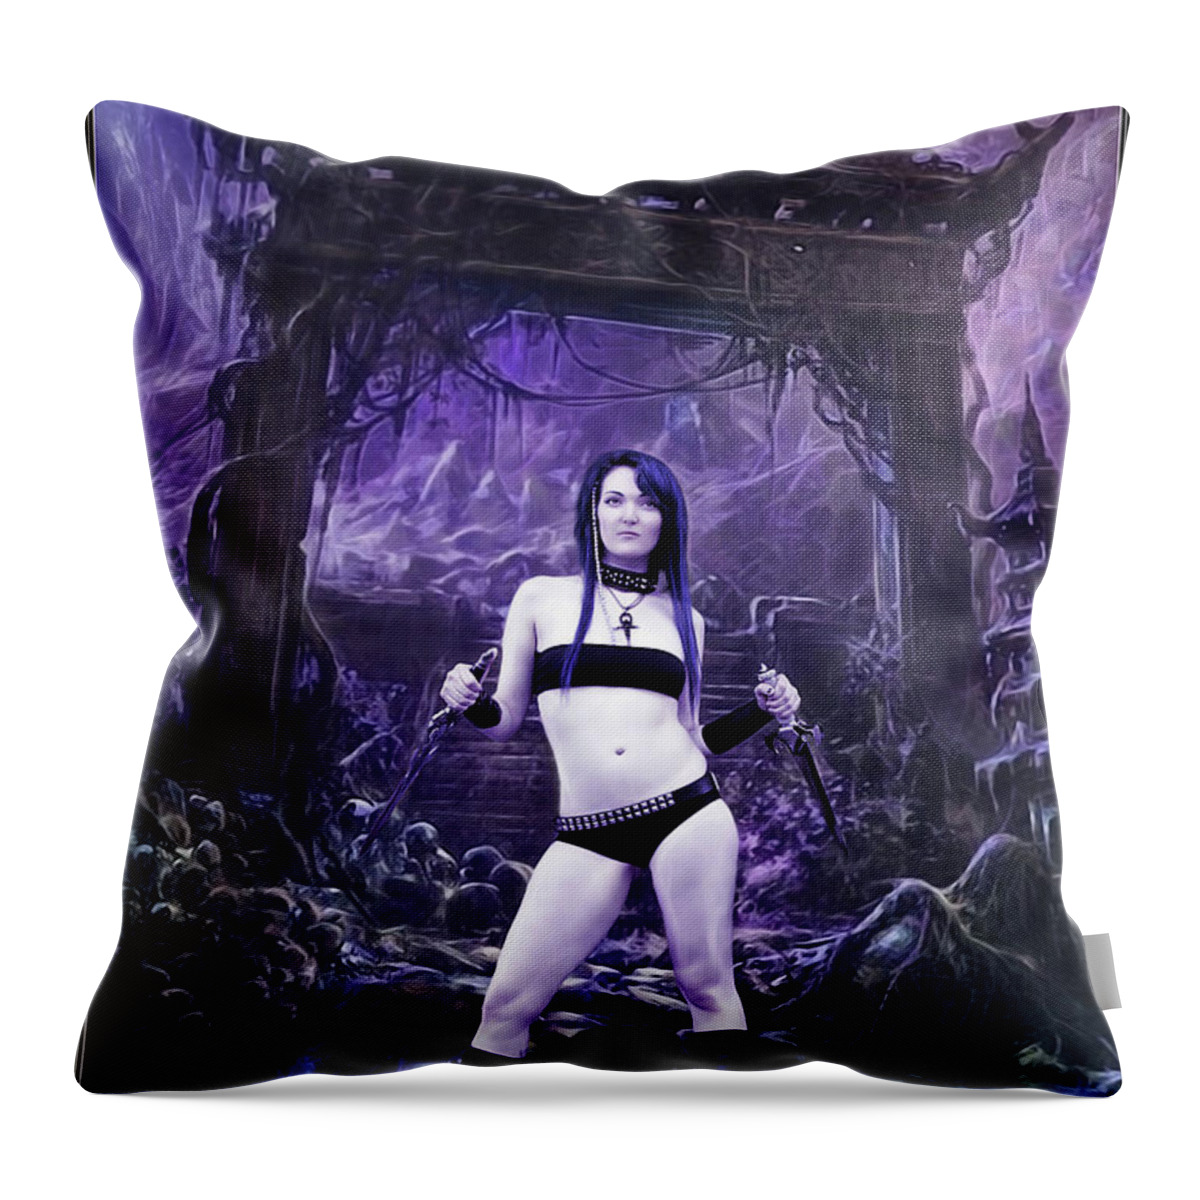 Rogue Throw Pillow featuring the photograph Wandering Rogue by Jon Volden